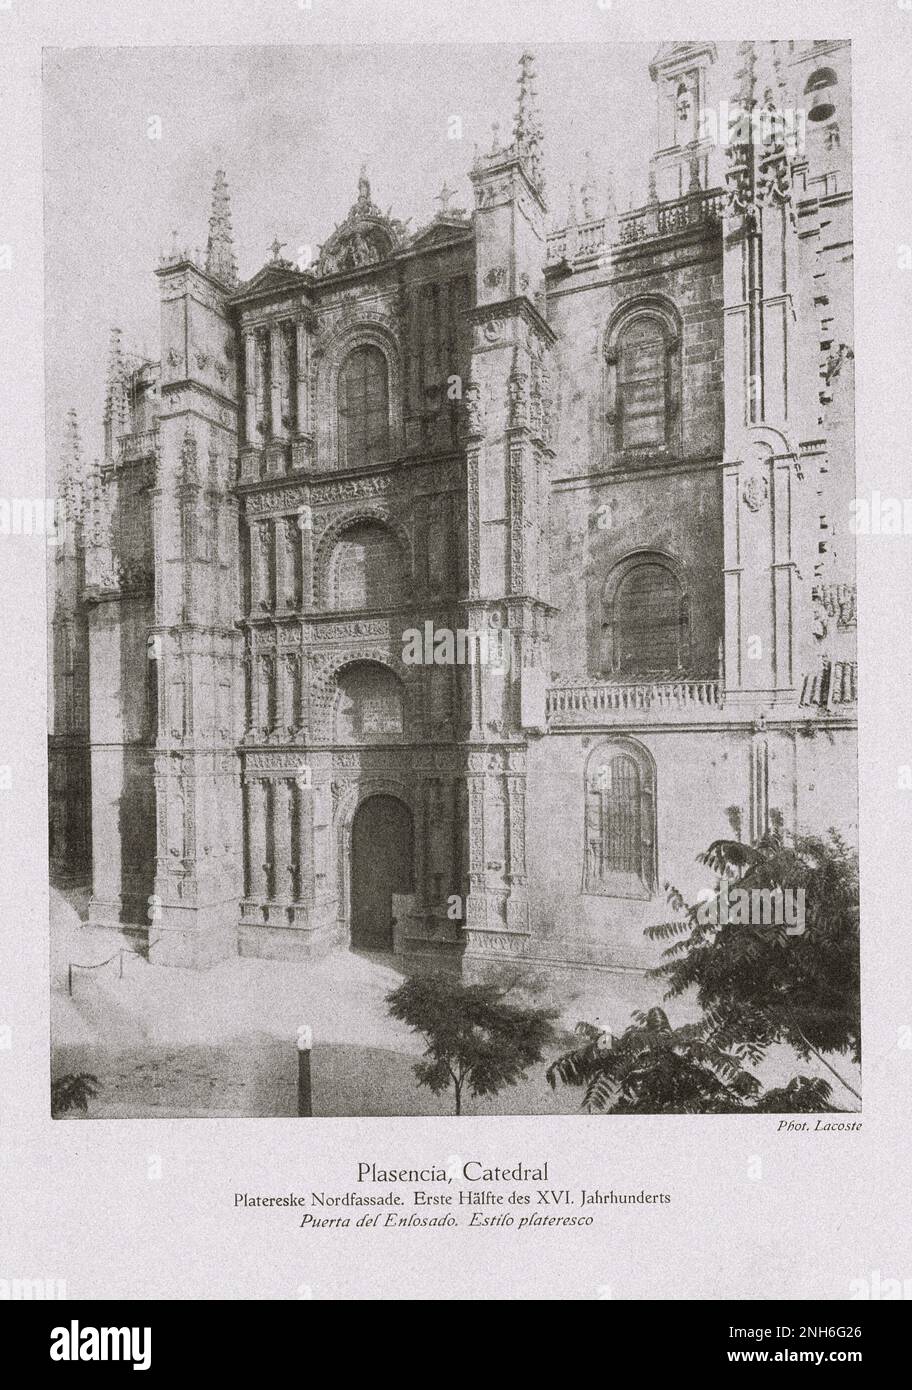 Architecture of Old Spain. Vintage photo of old Cathedral of Plasencia (Catedral de Santa María), a Roman Catholic temple in the city of Plasencia, Province of Cáceres, Extremadura, Spain. The first half of the 16th century Stock Photo